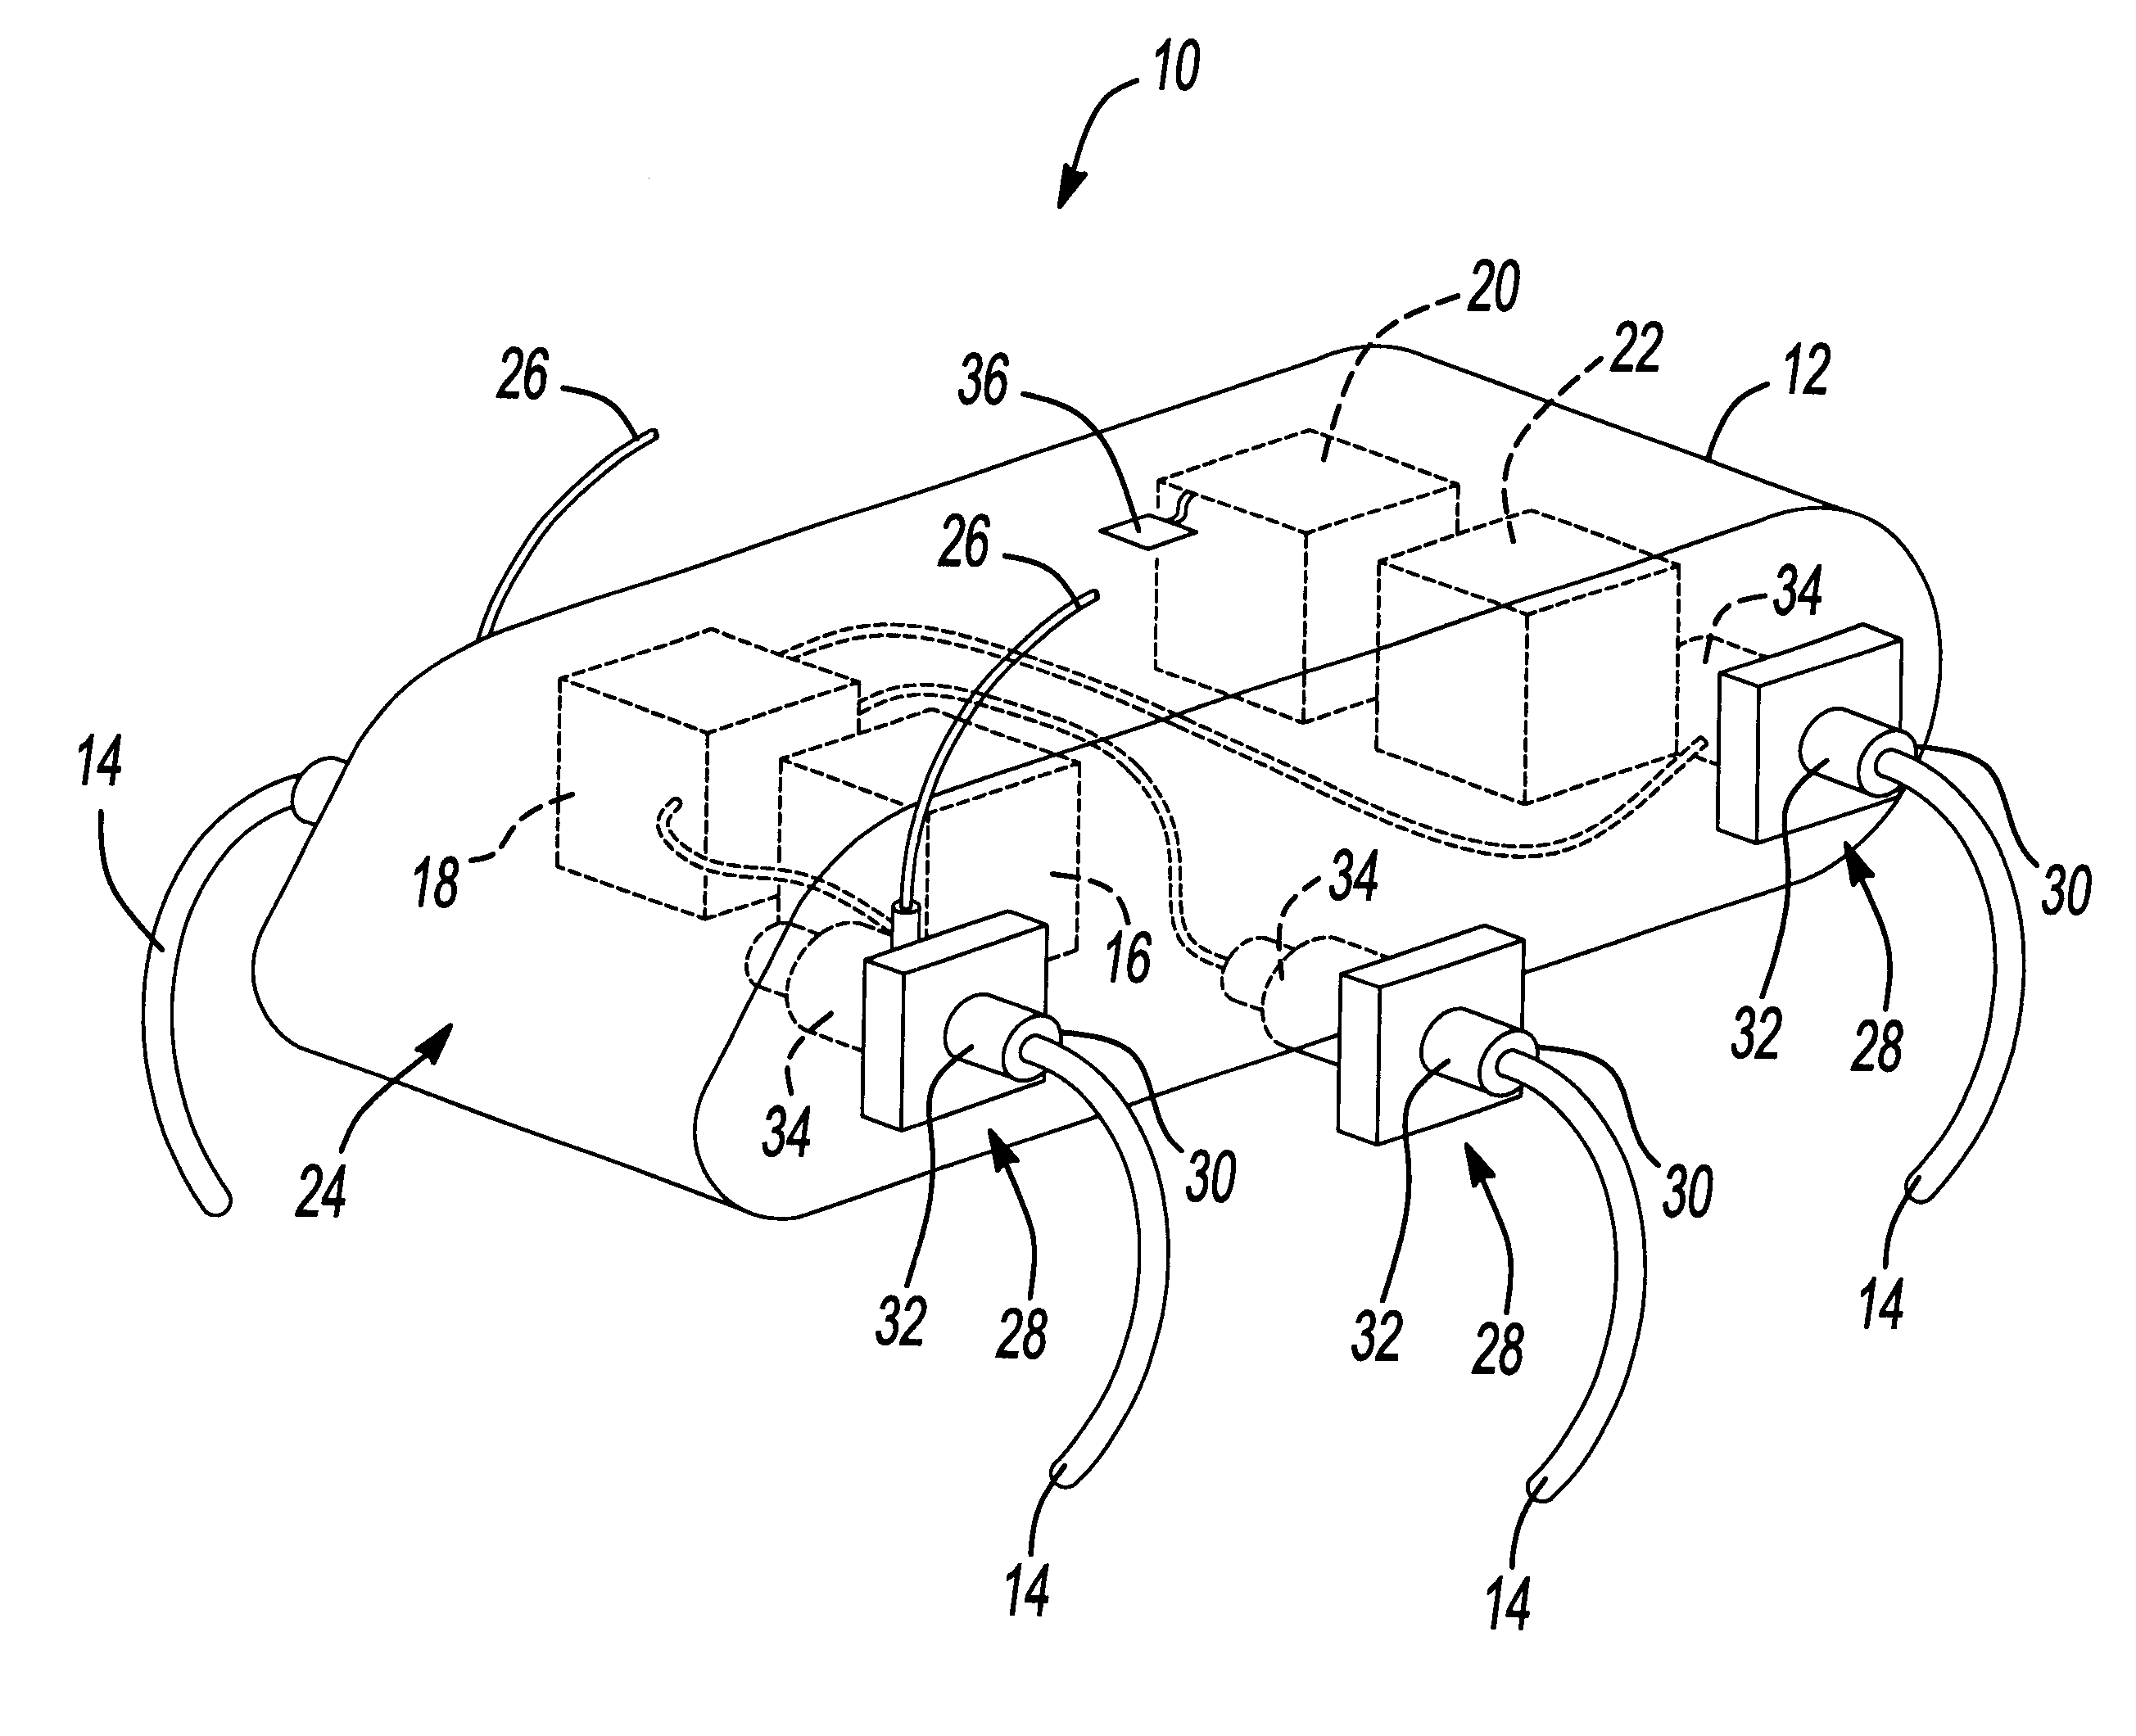 Patent application exemple